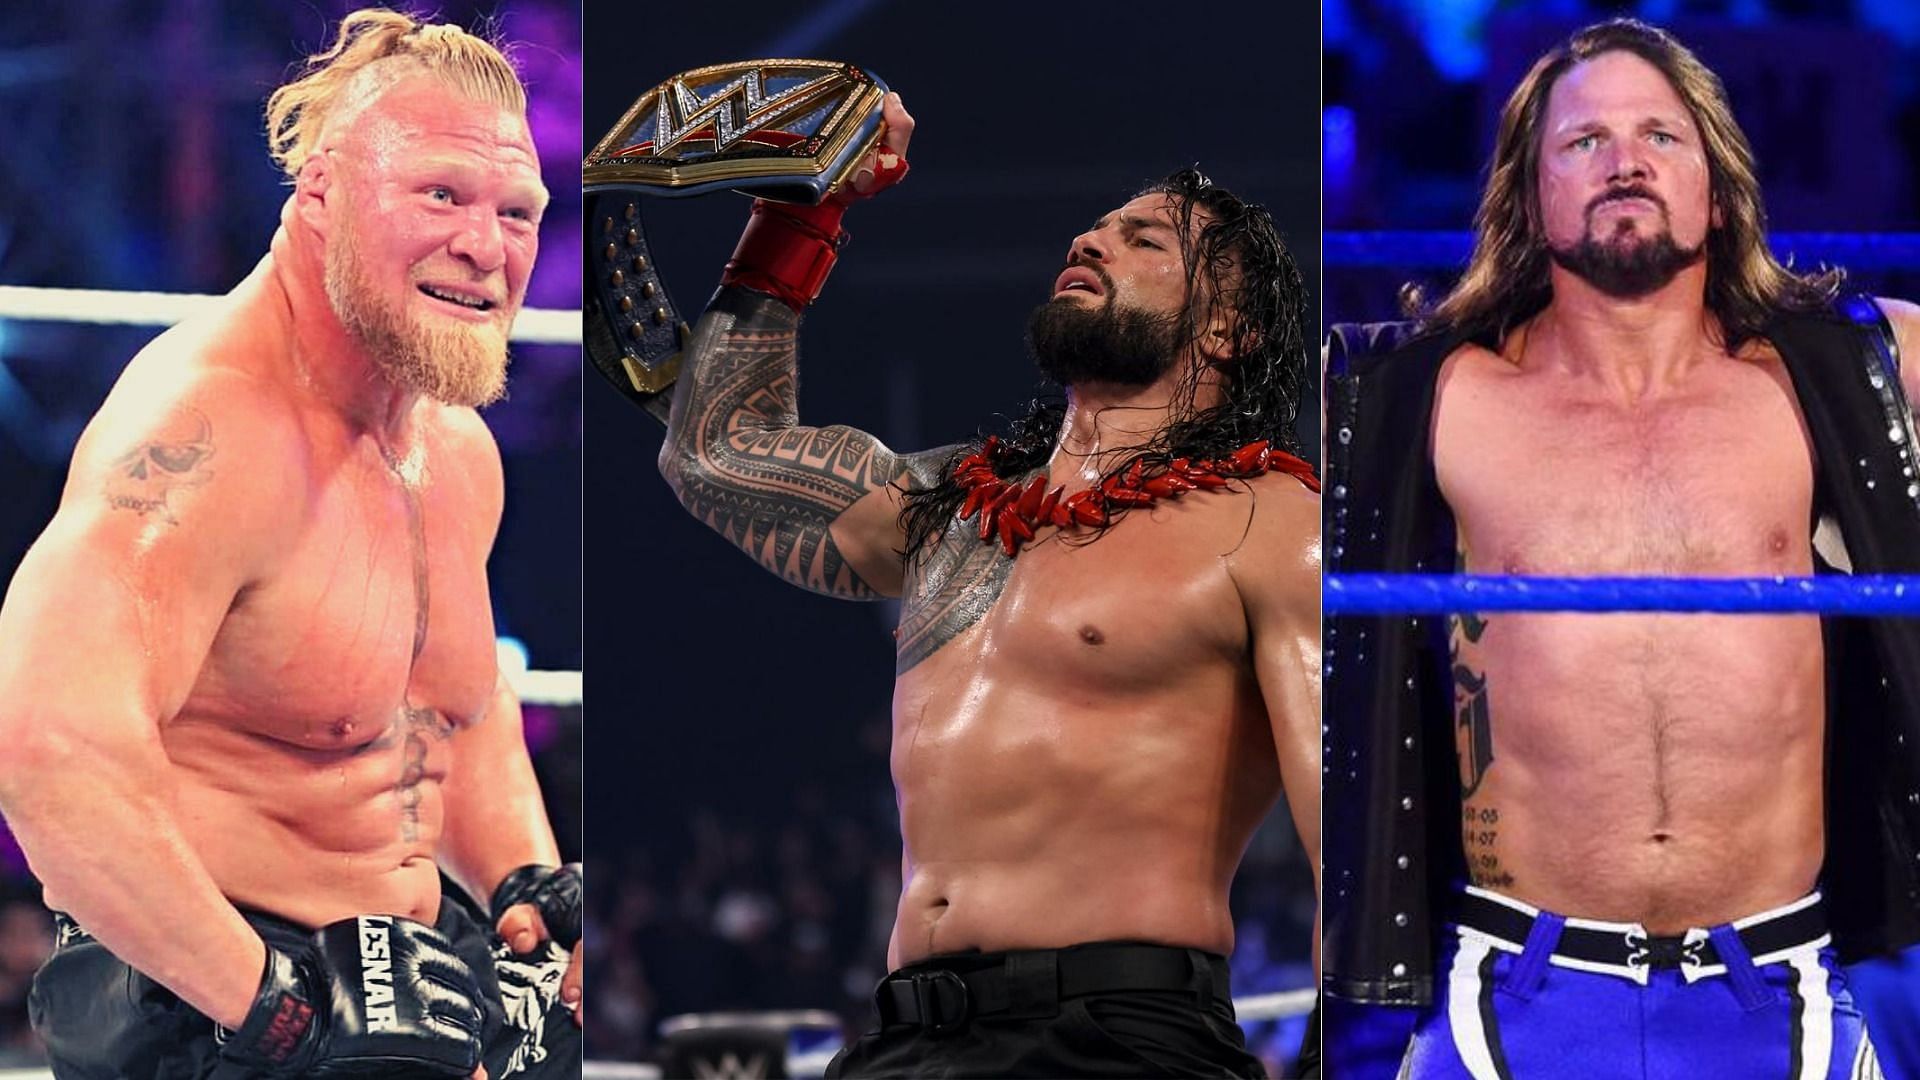 <div></noscript>5 Top WWE rumors from this week: Roman Reigns and Brock Lesnar's backstage influence, AJ Styles' massive record (November 27th, 2021)</div>